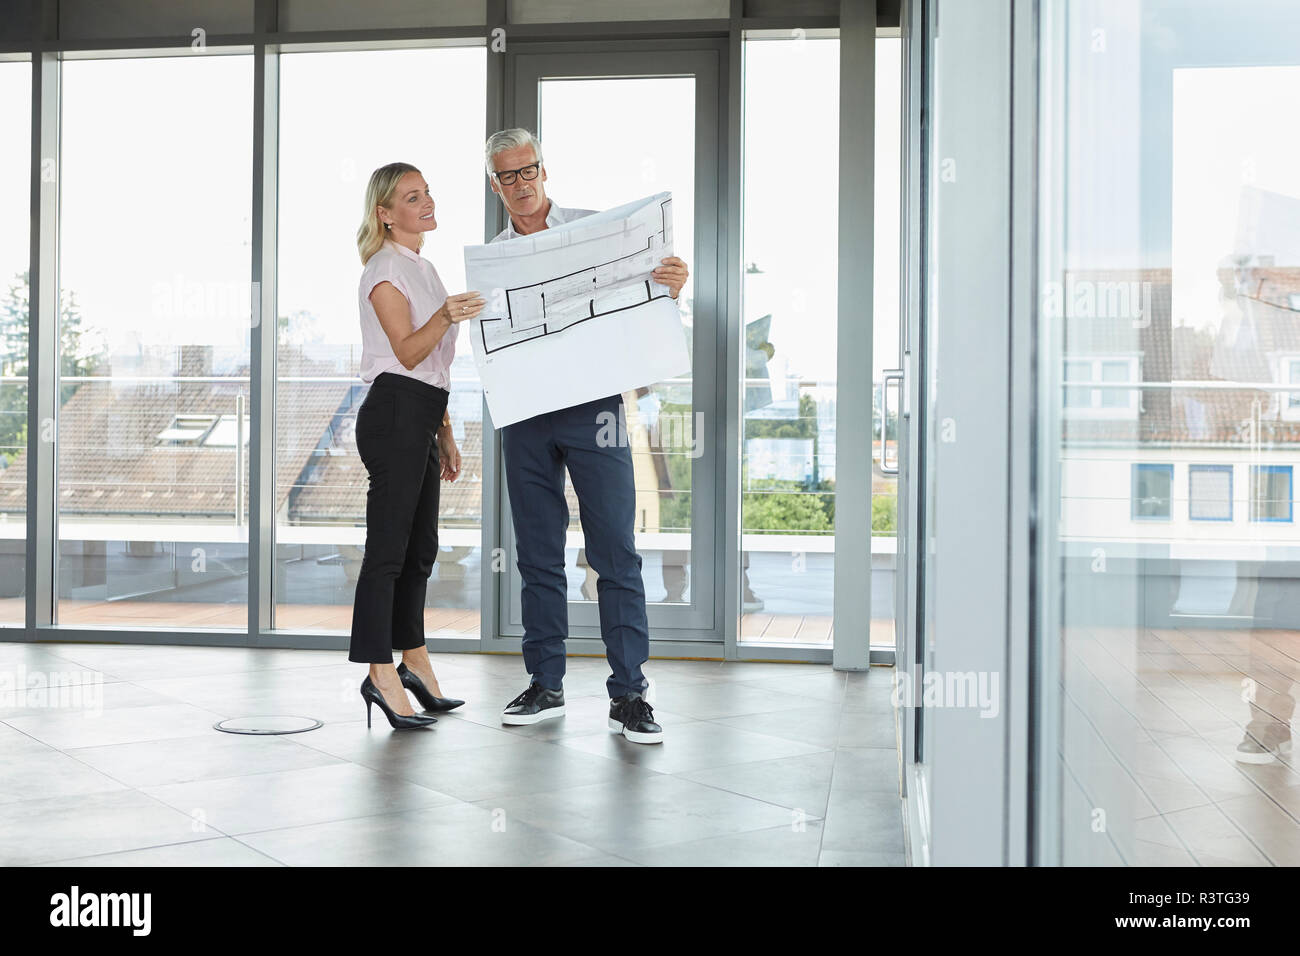 Businessman and woman standing in office, discussing blueprint Stock Photo